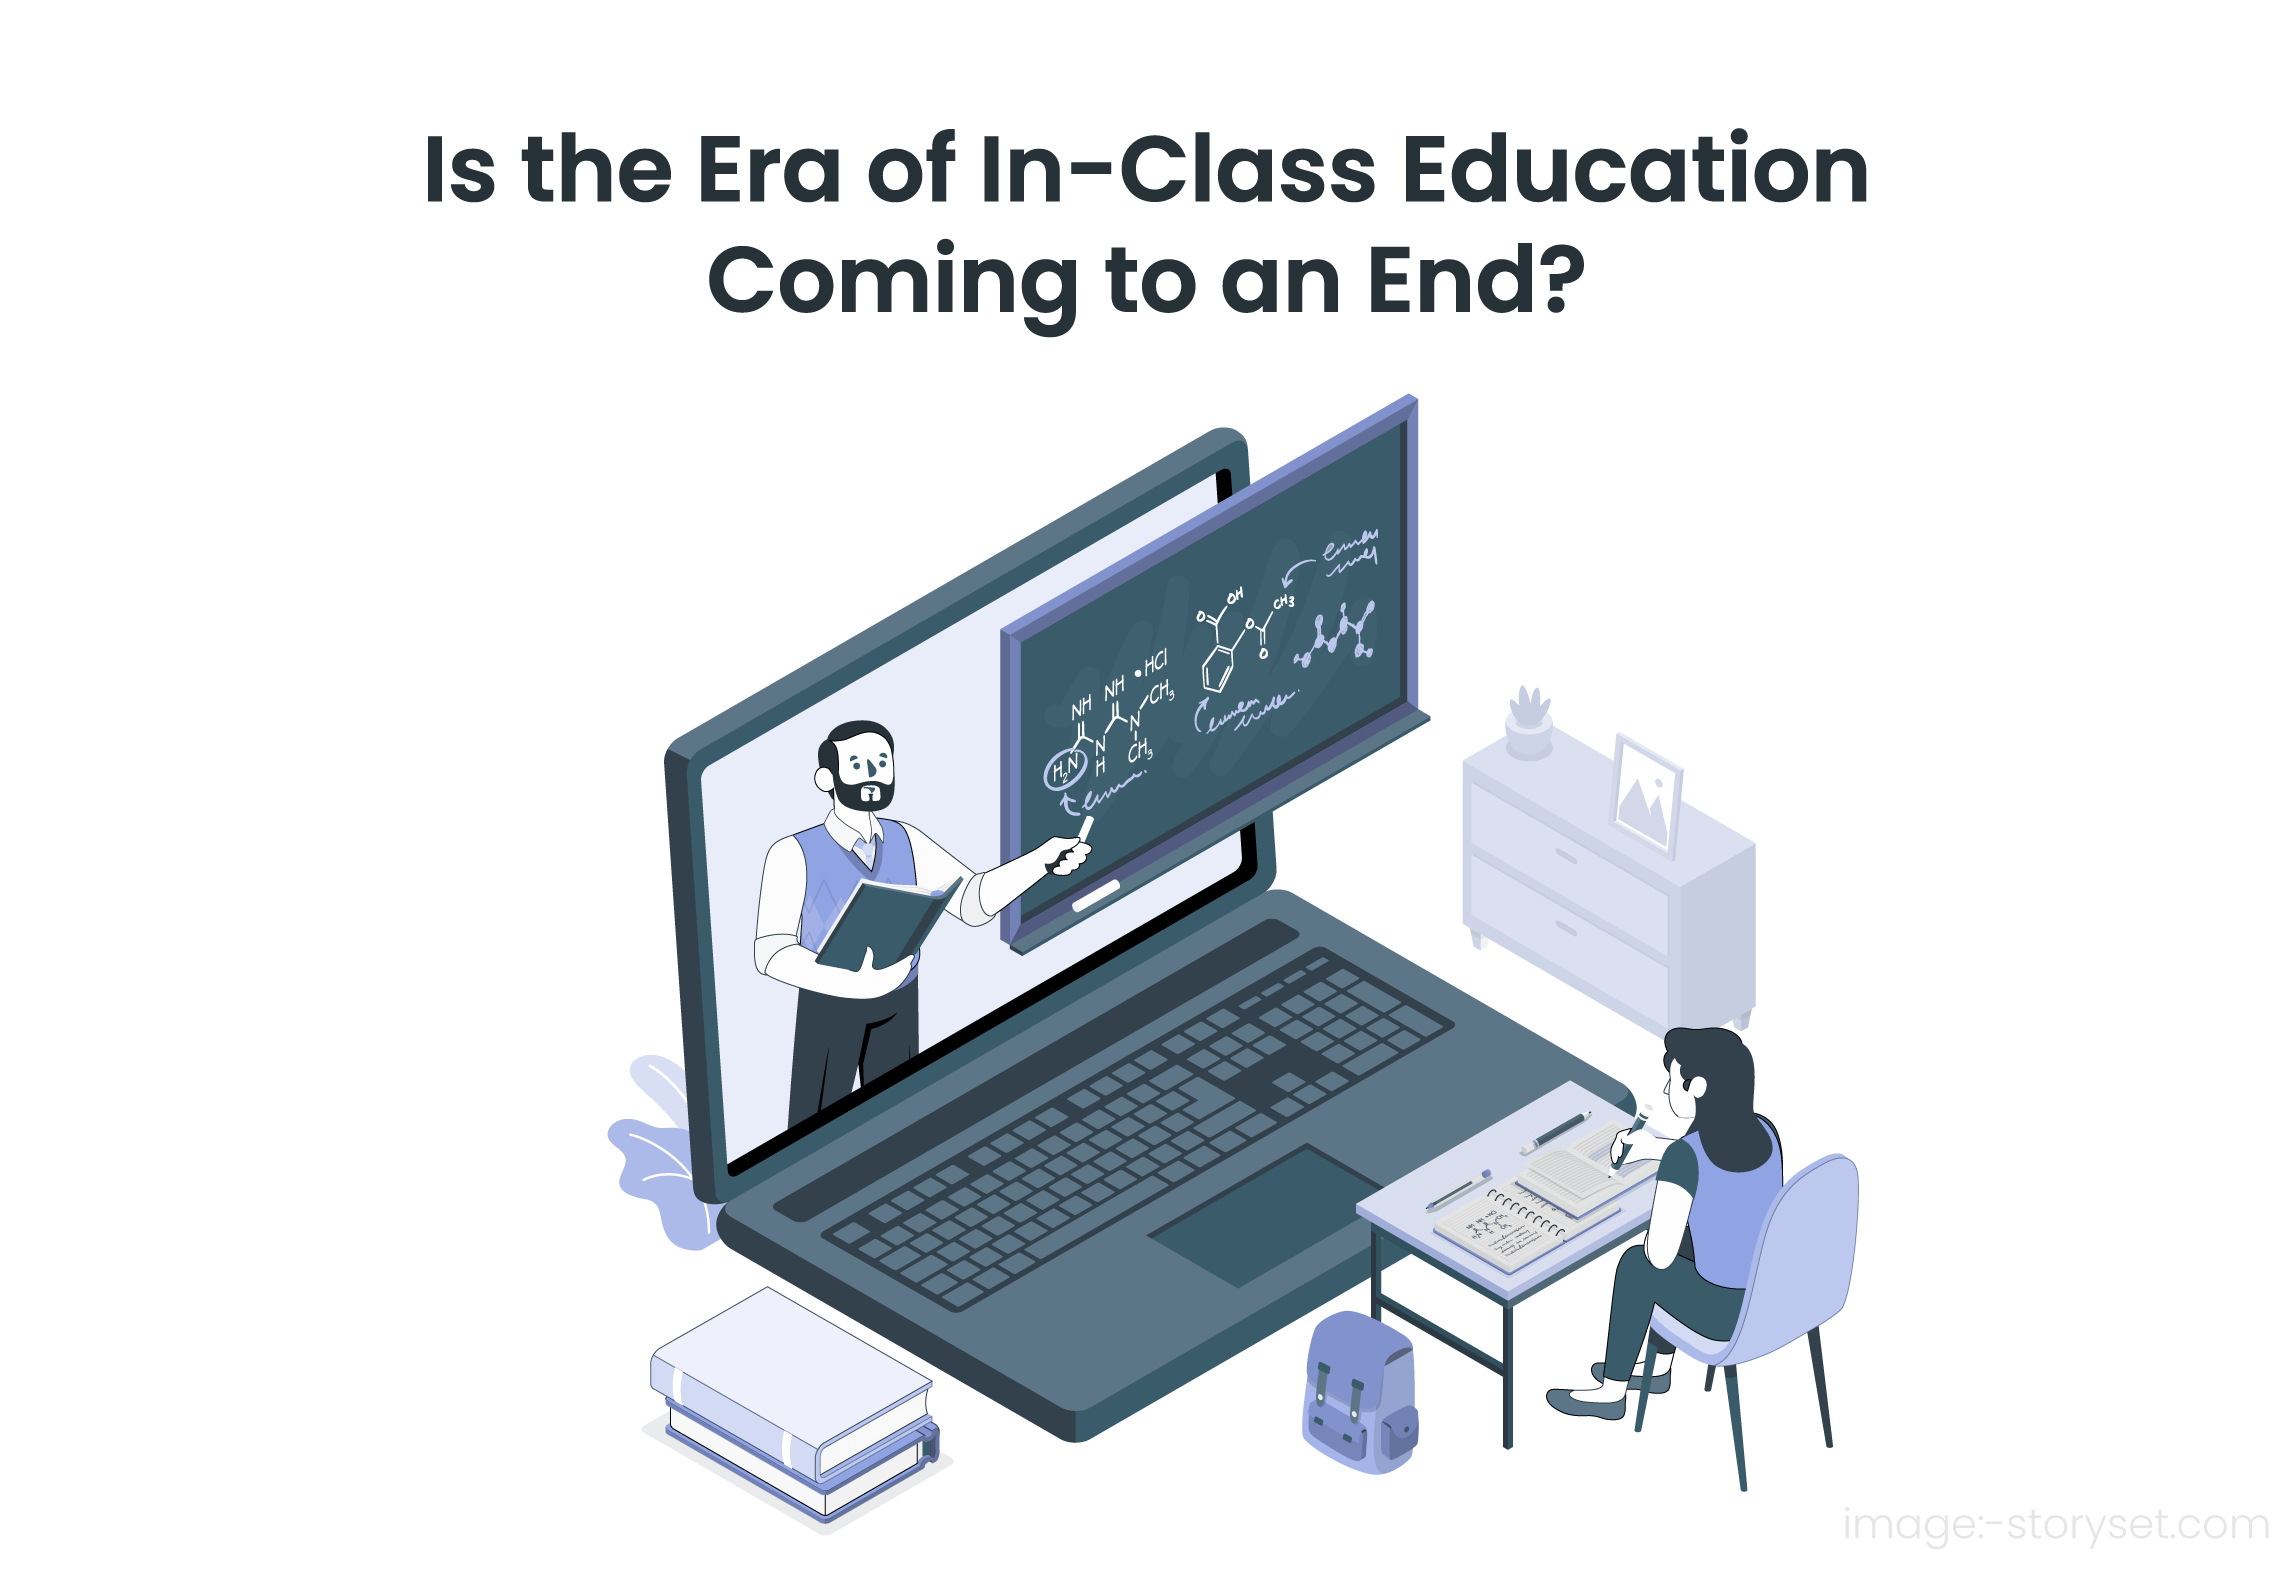 Is the Era of In-Class Education Coming to an End?